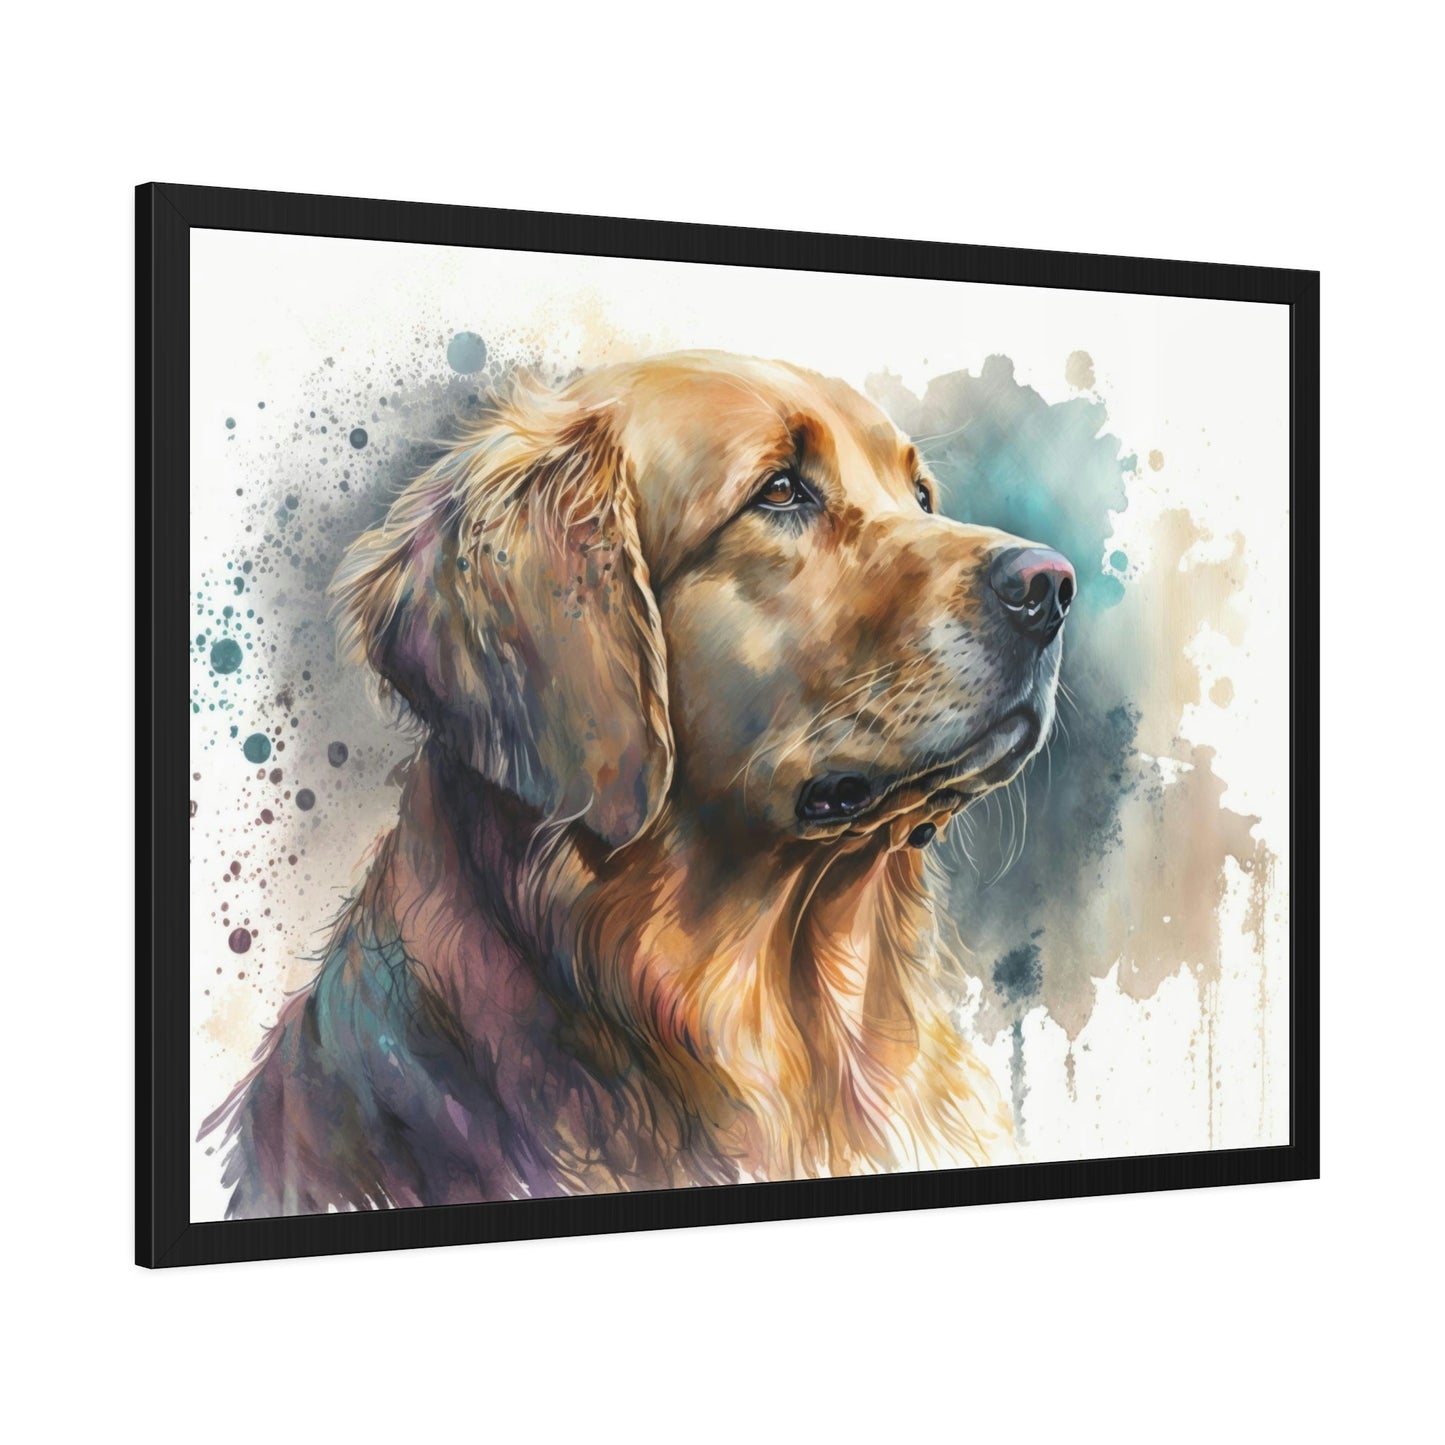 Dog's World: Framed Poster of a Happy Dog on Canvas